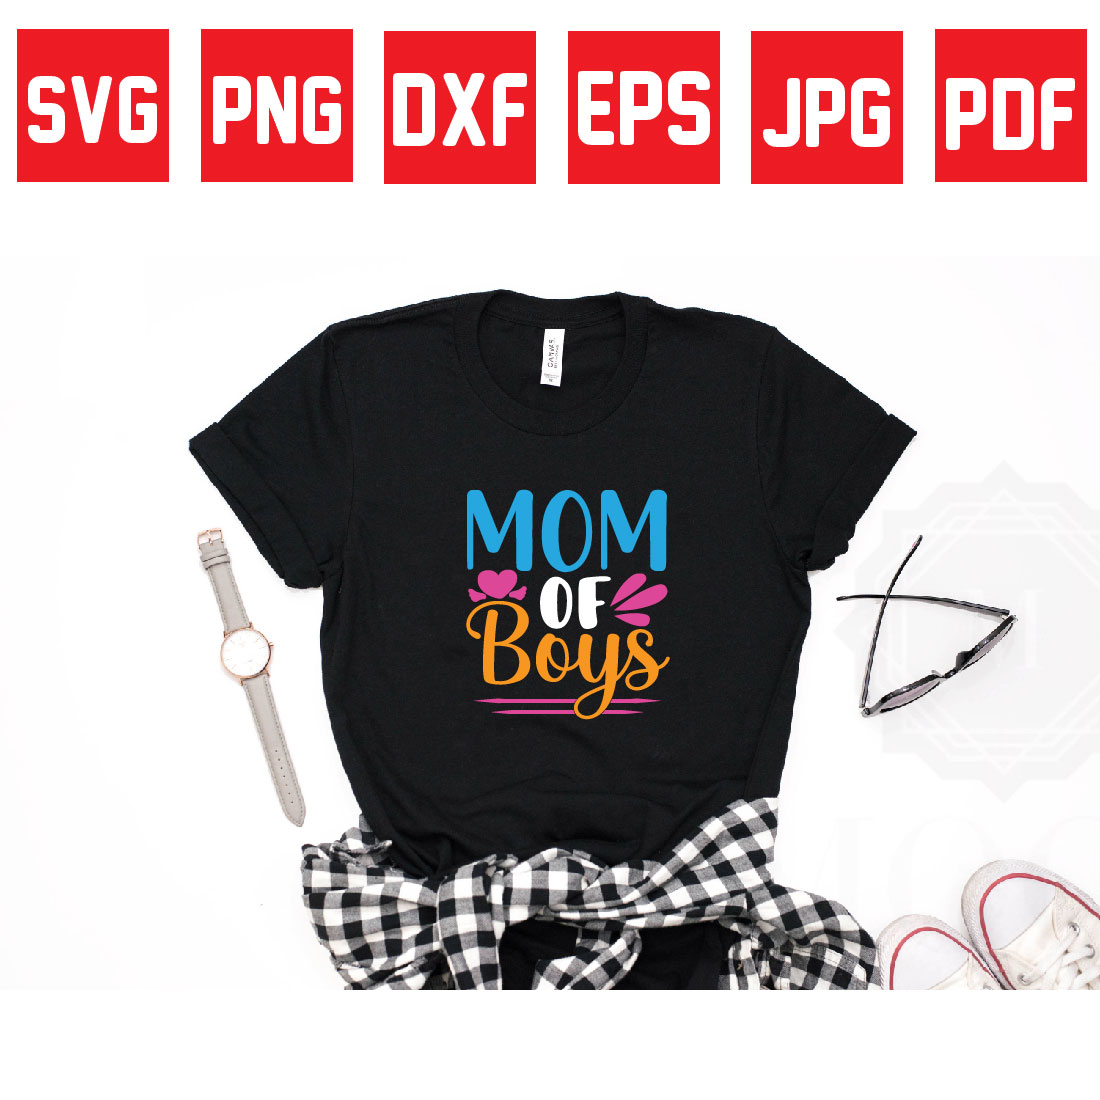 mom of boys preview image.